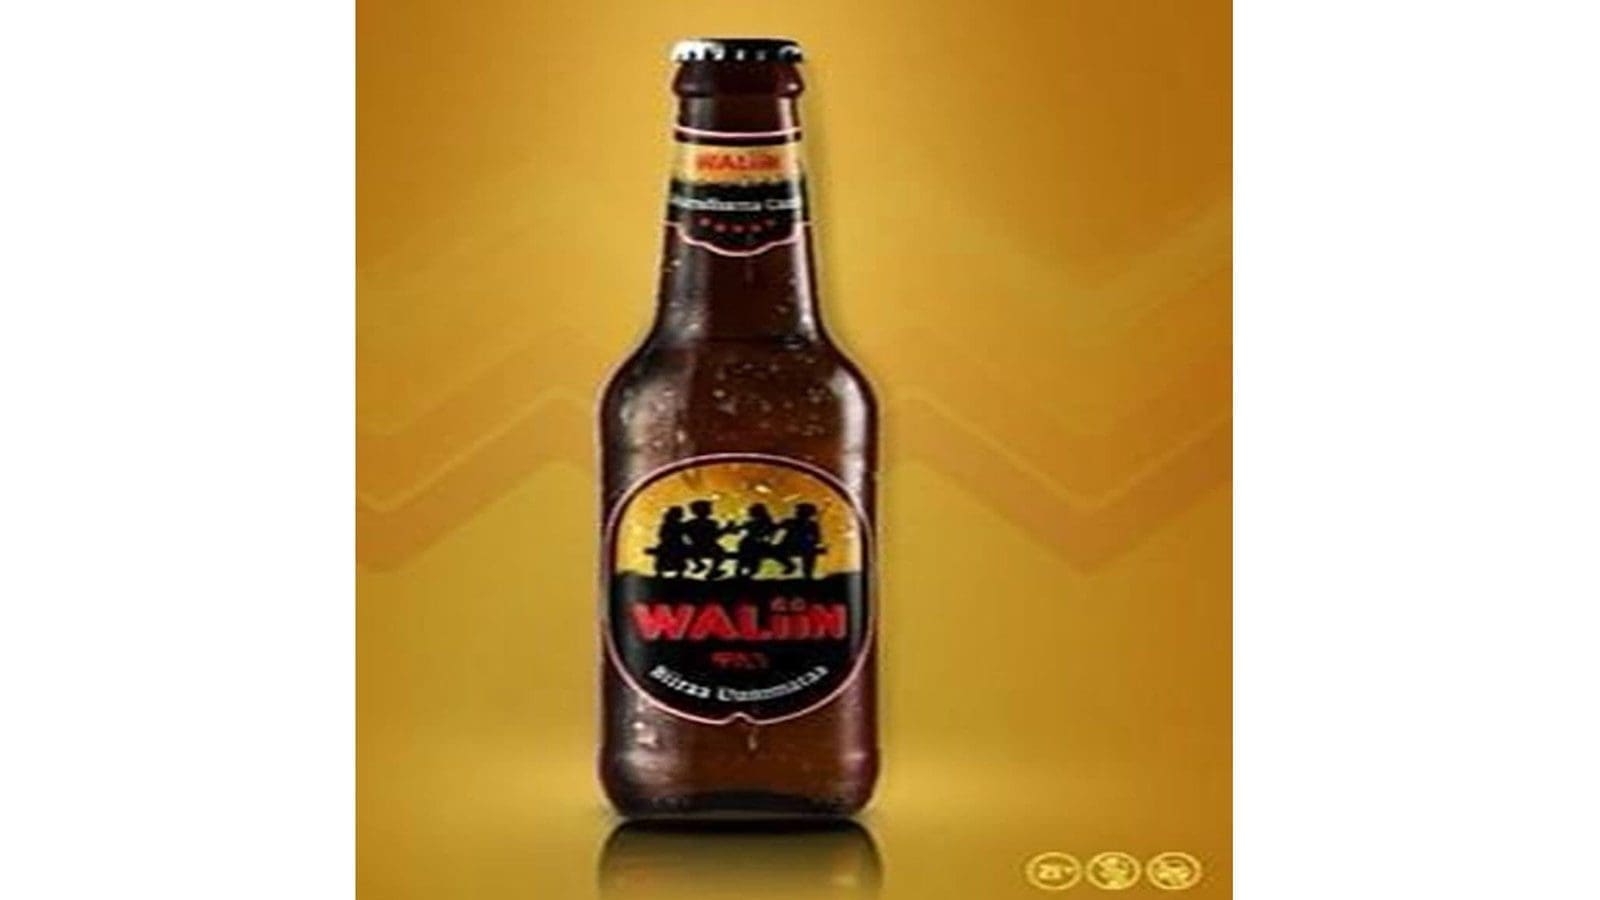 Ethiopia based brewer United Beverages SC introduces new premium beer brand dubbed Waliin